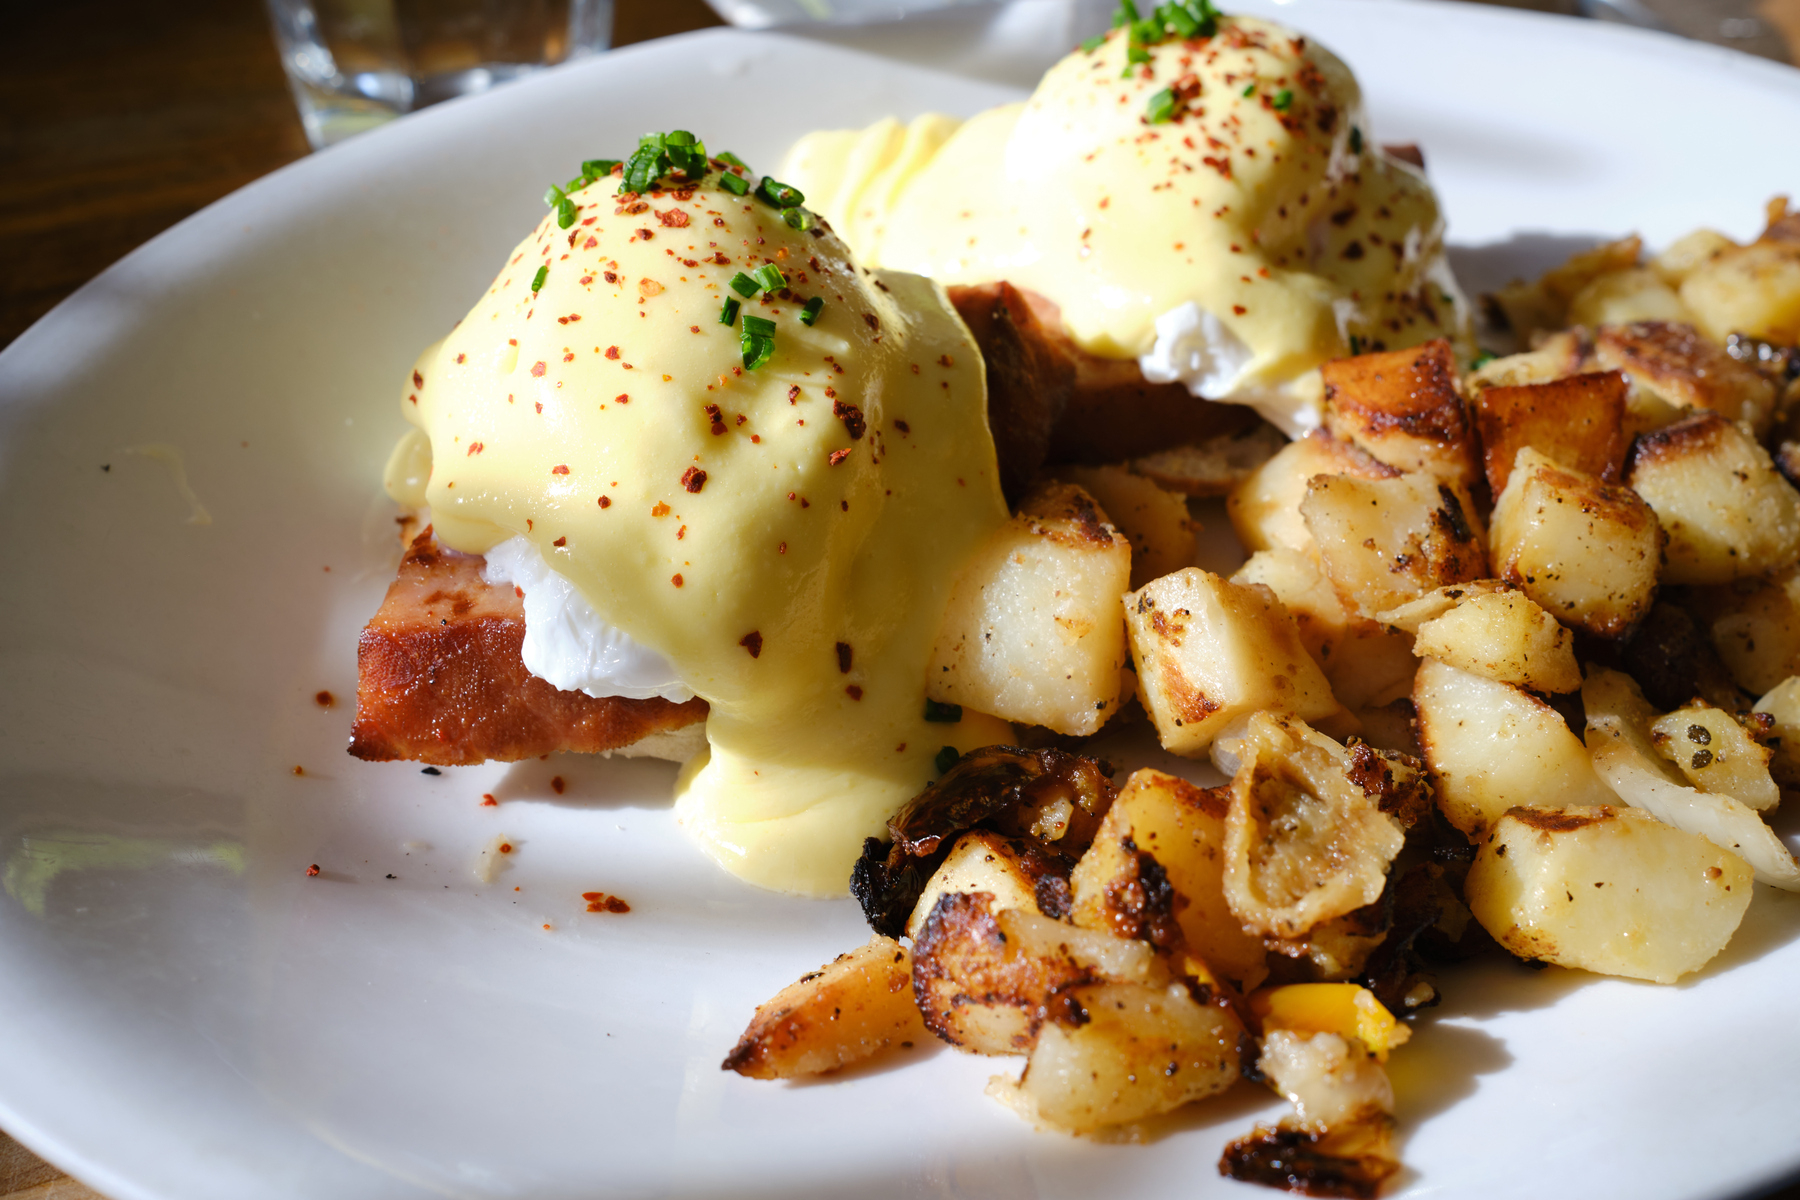 Eggs benedict, served with an extra thick slice of smoked ham and a side of breakfast potatoes.